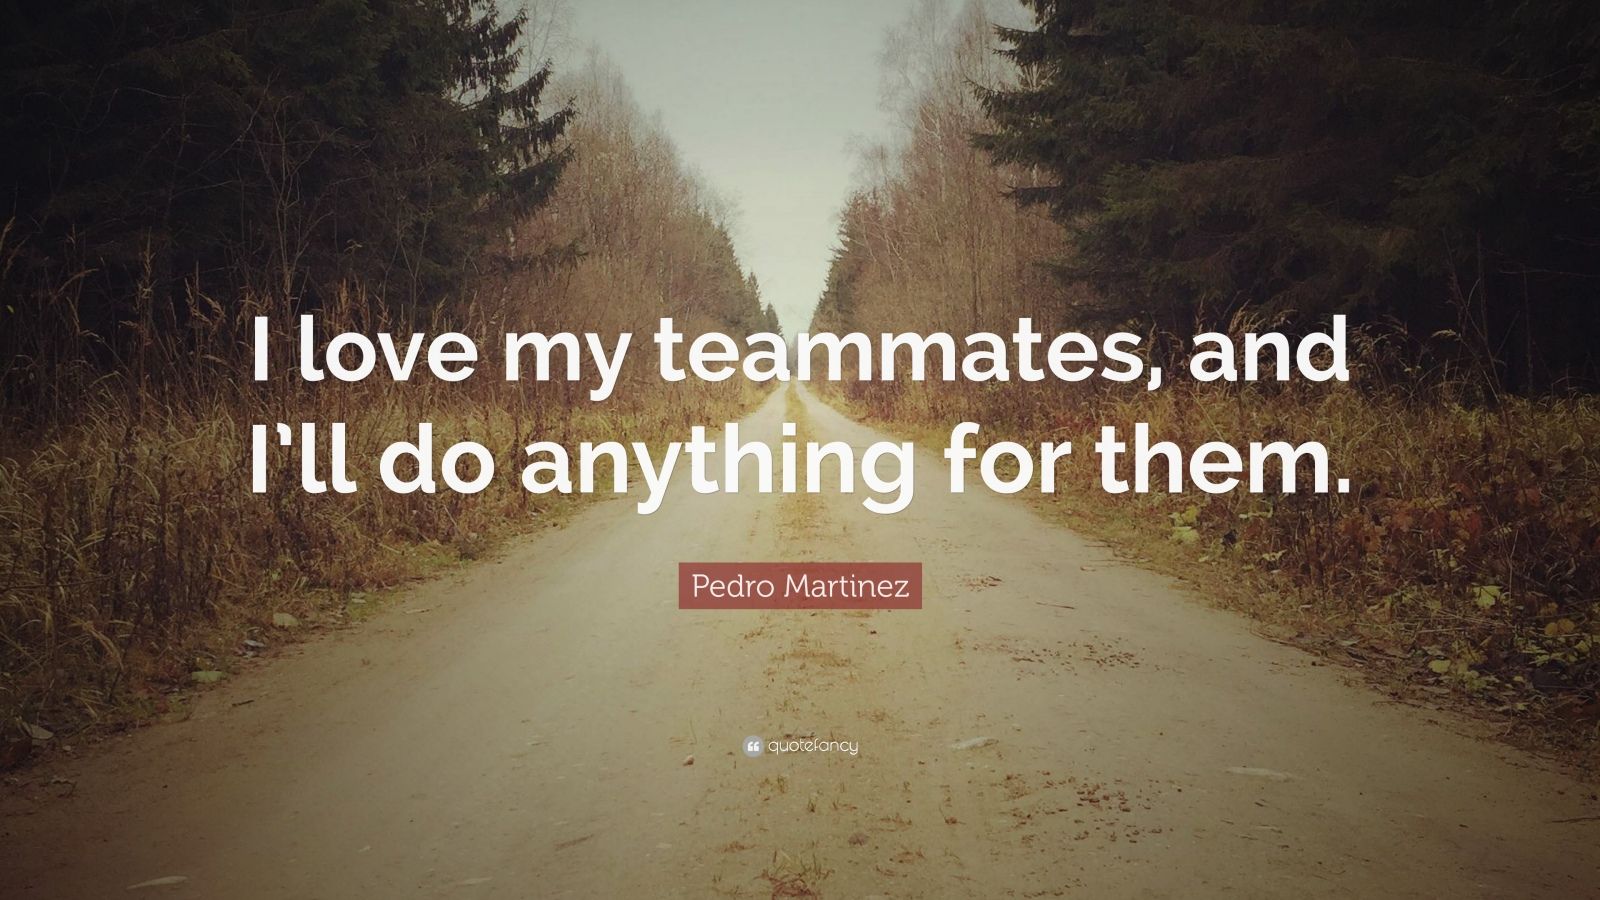 Pedro Martinez Quote: “If you want to follow some good steps, it